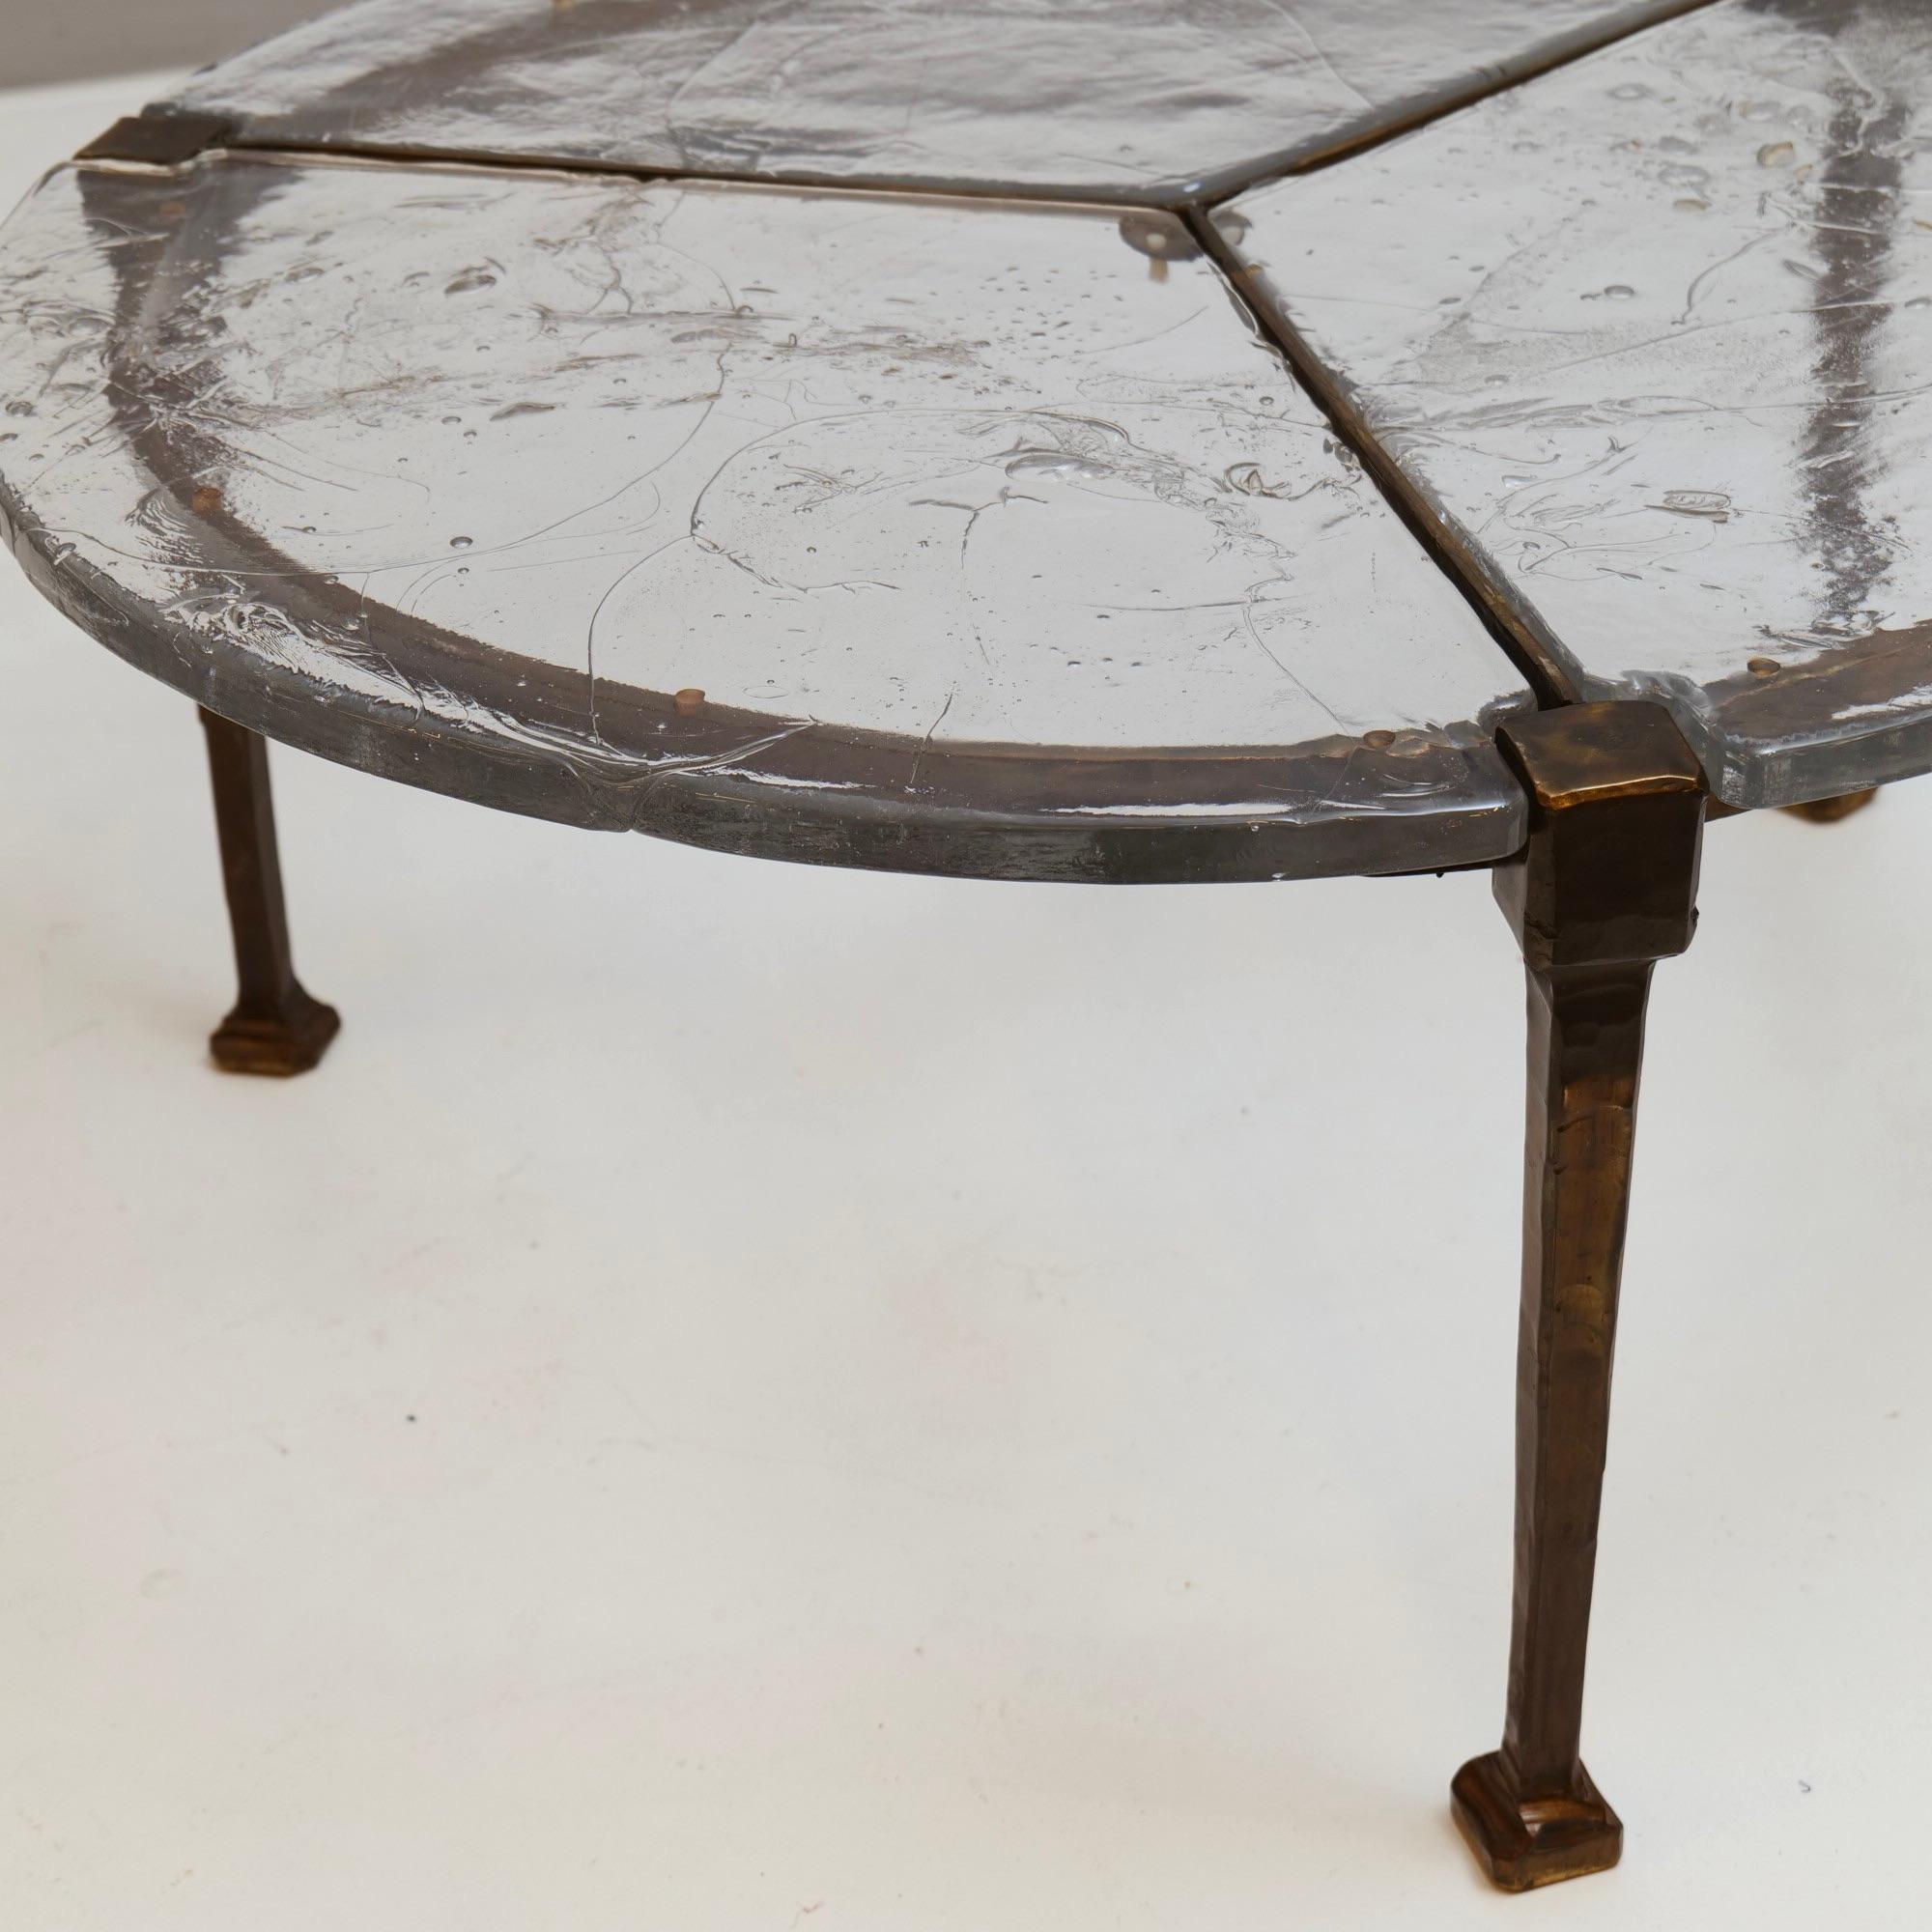 Brutalist forged bronze & glass table by Lothar Klute - 1980s For Sale